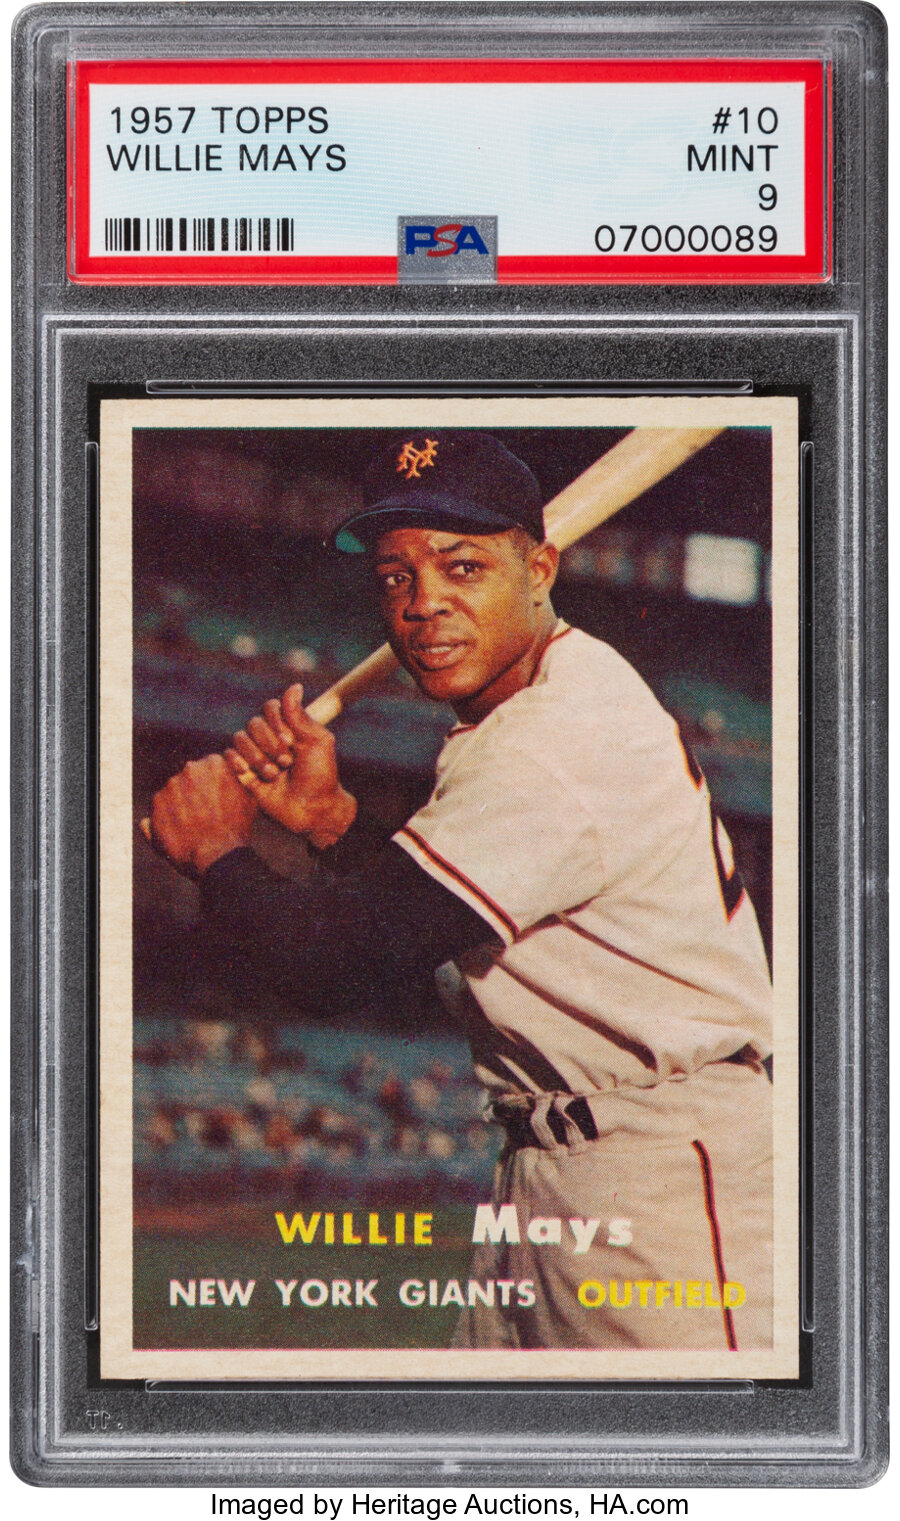 1957 Topps Willie Mays #10 PSA Mint 9 - None Higher